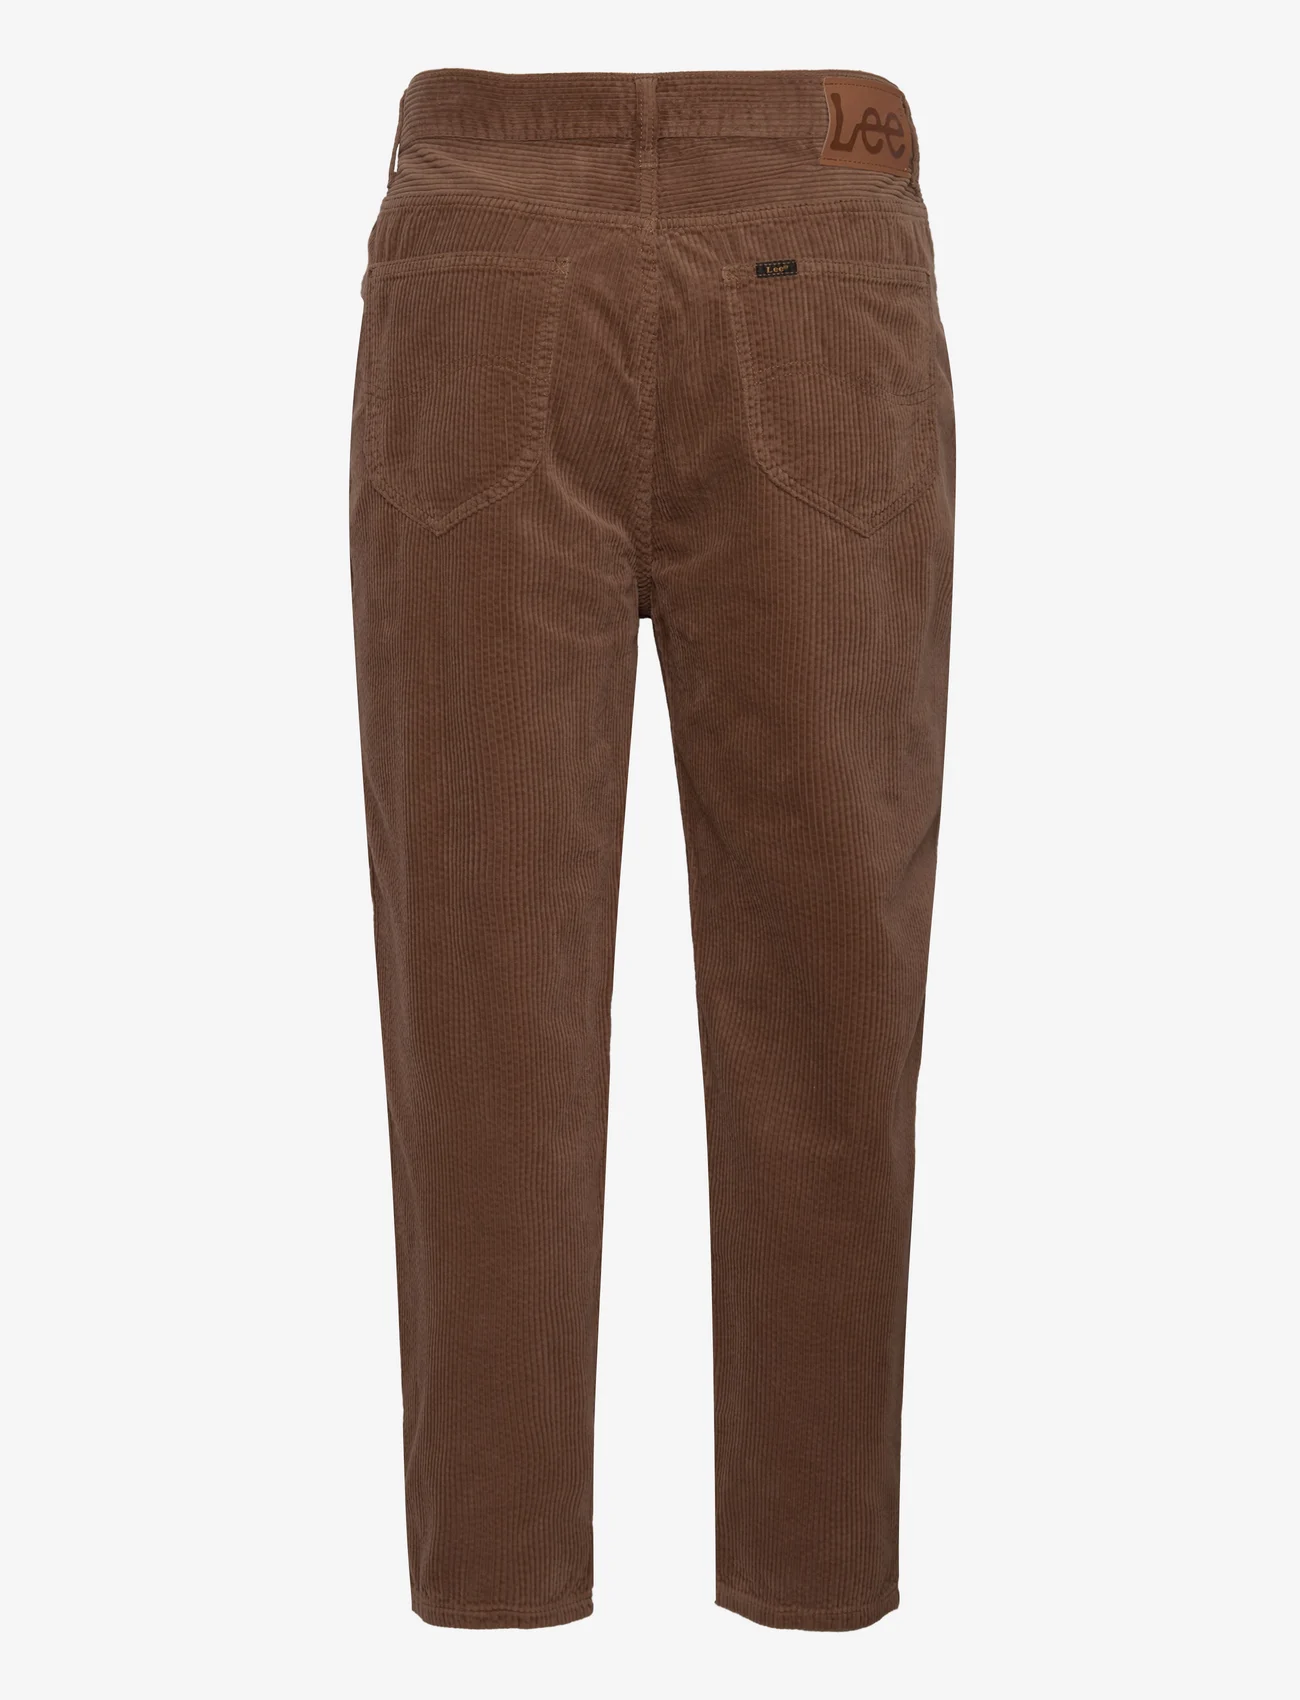 Lee Jeans - EASTON - tapered jeans - umber - 1